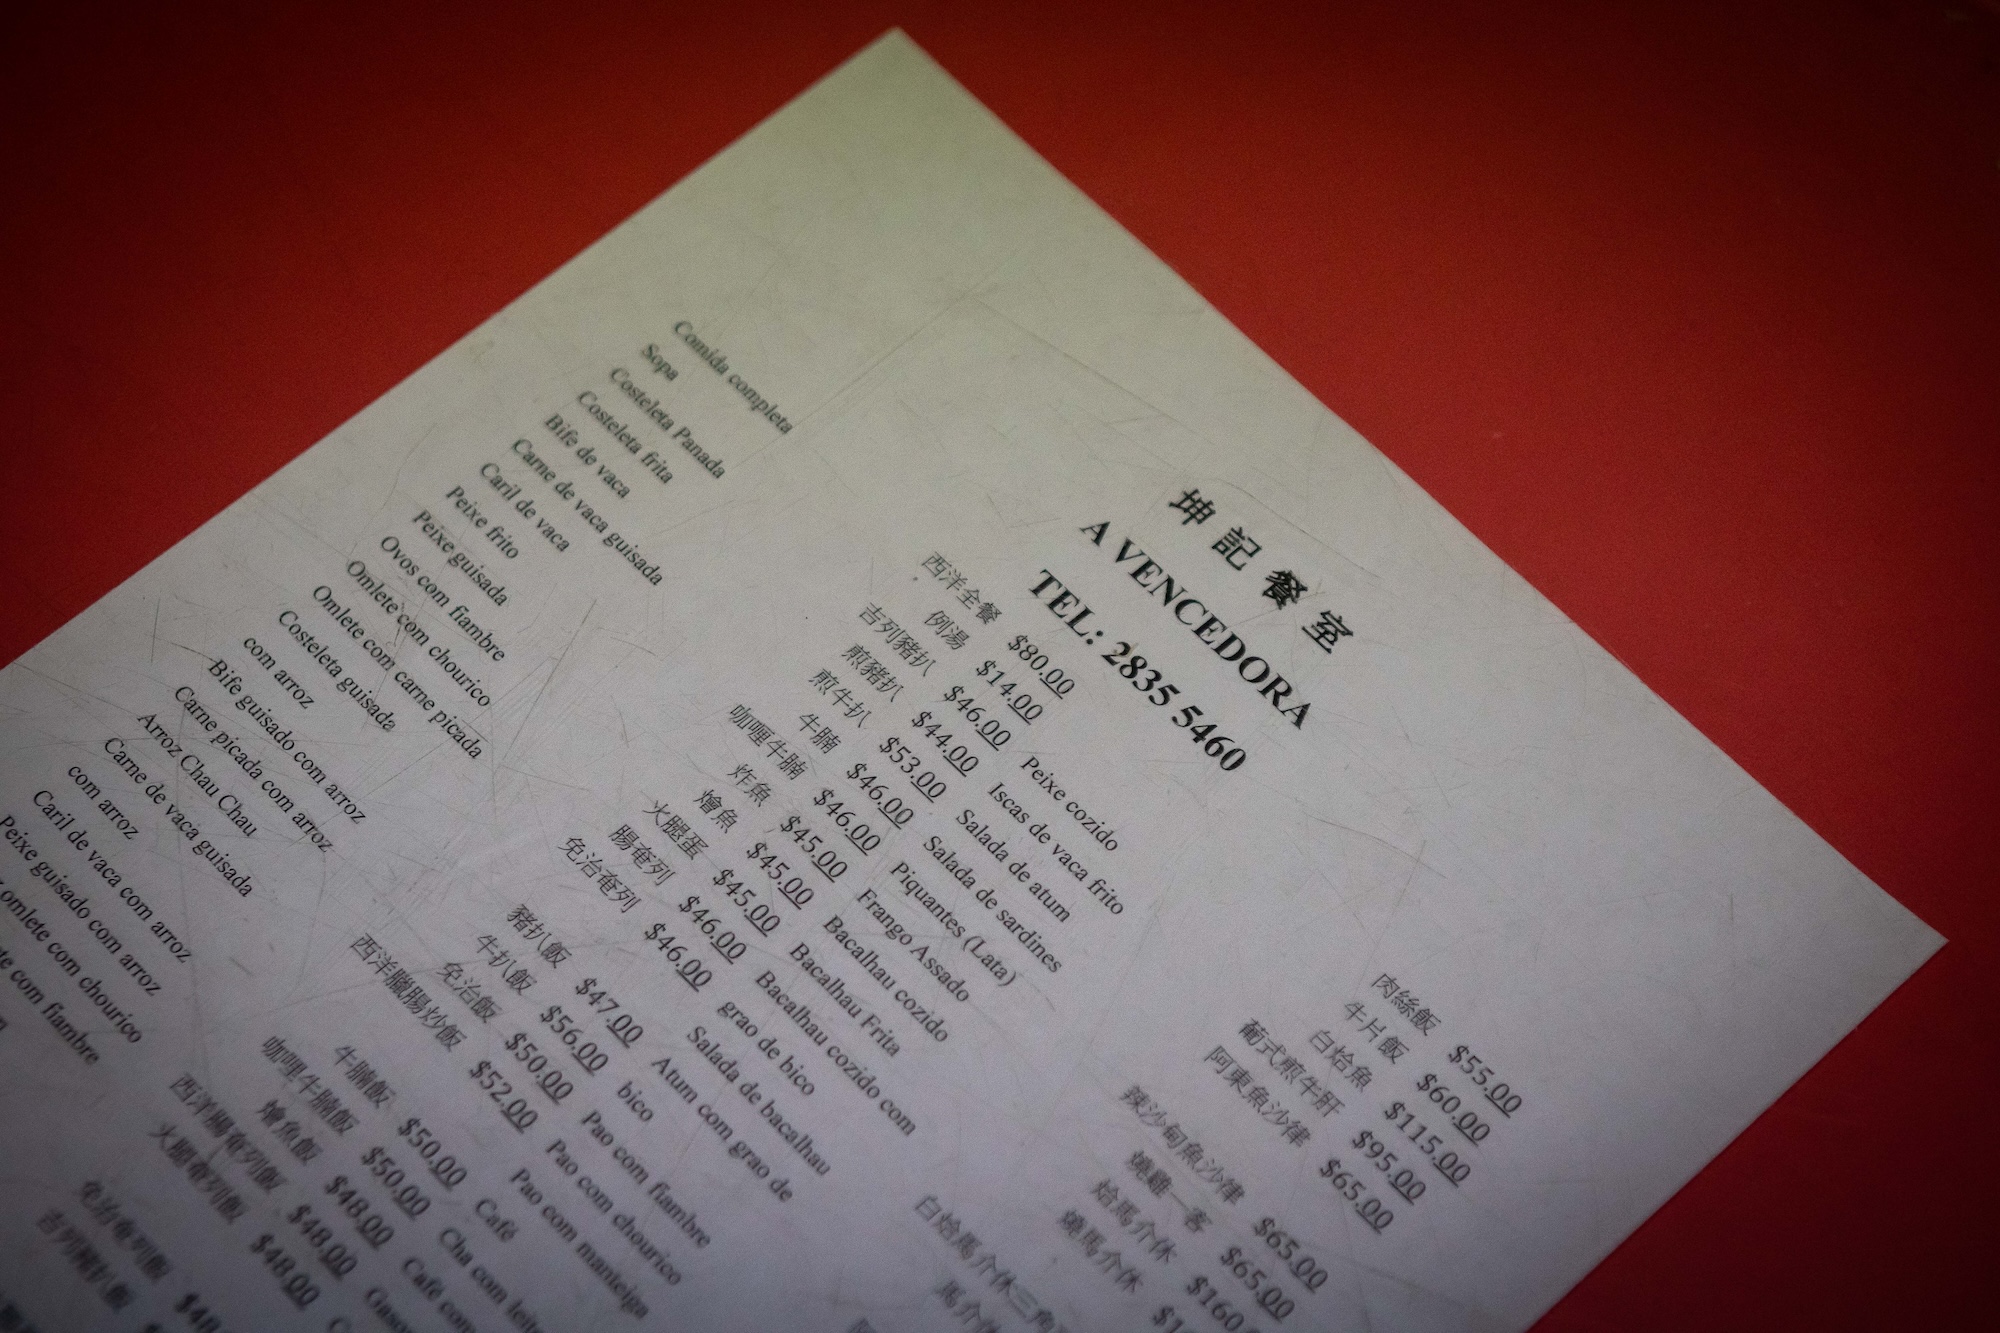 A menu deeply familiar to generations of Macao residents